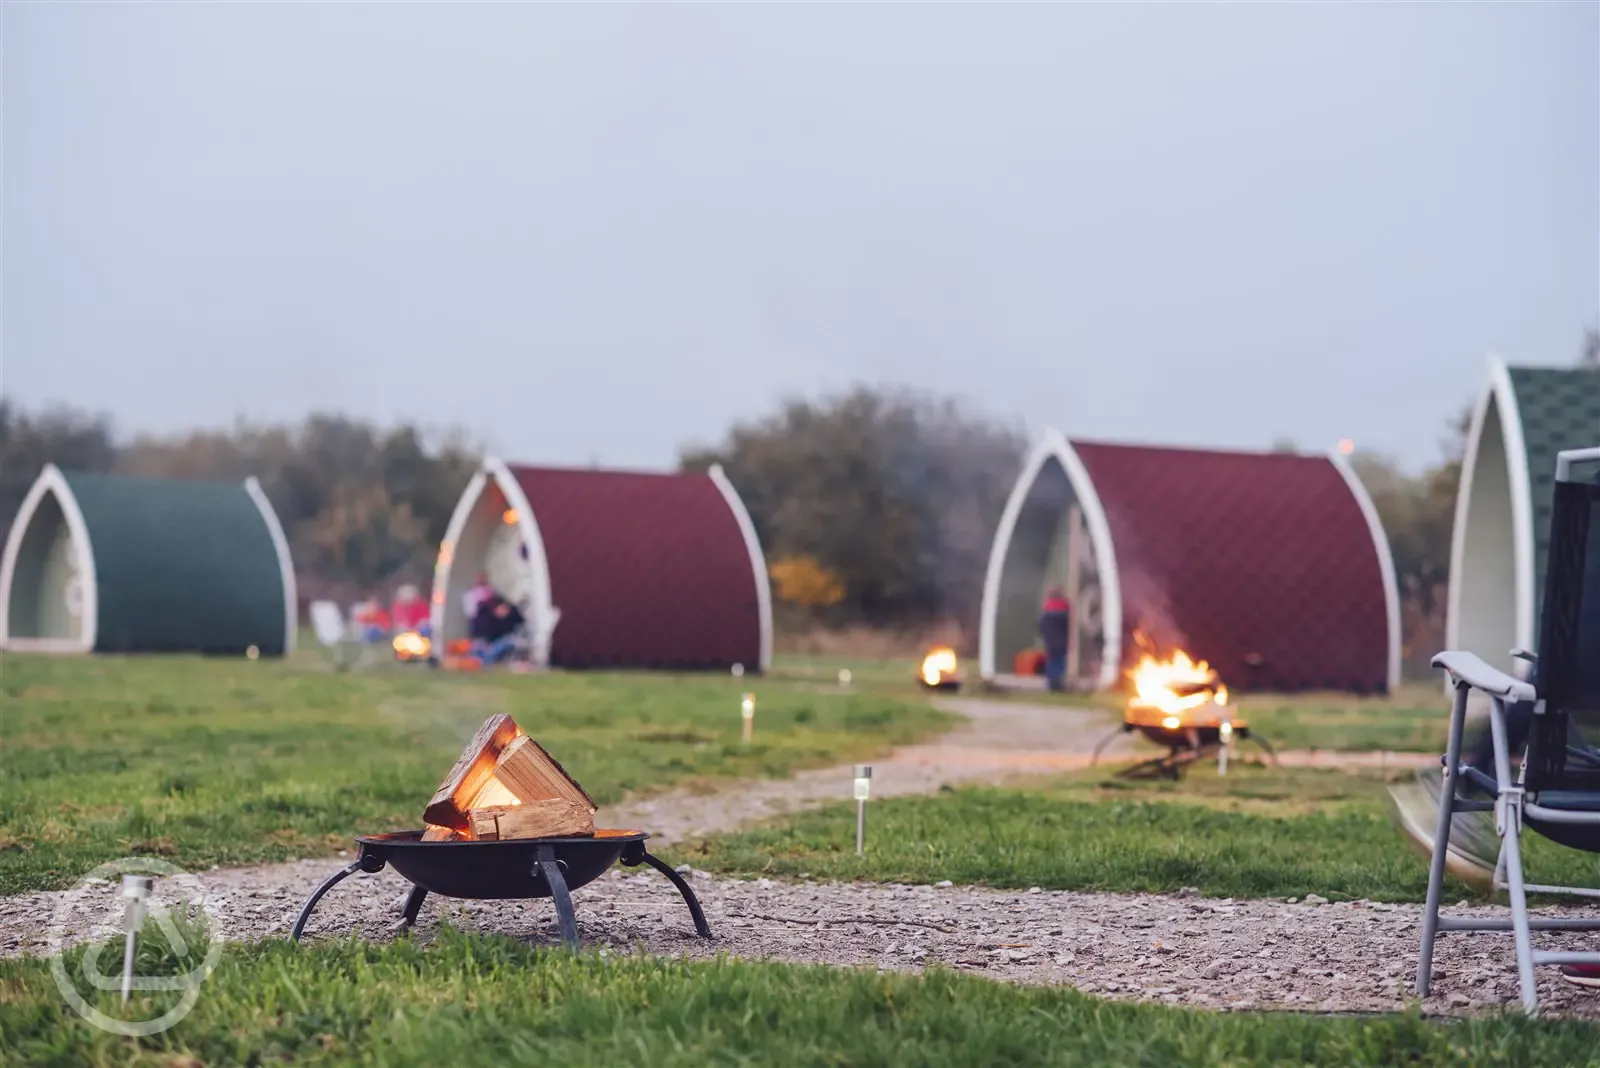 Camping pods and fire pits